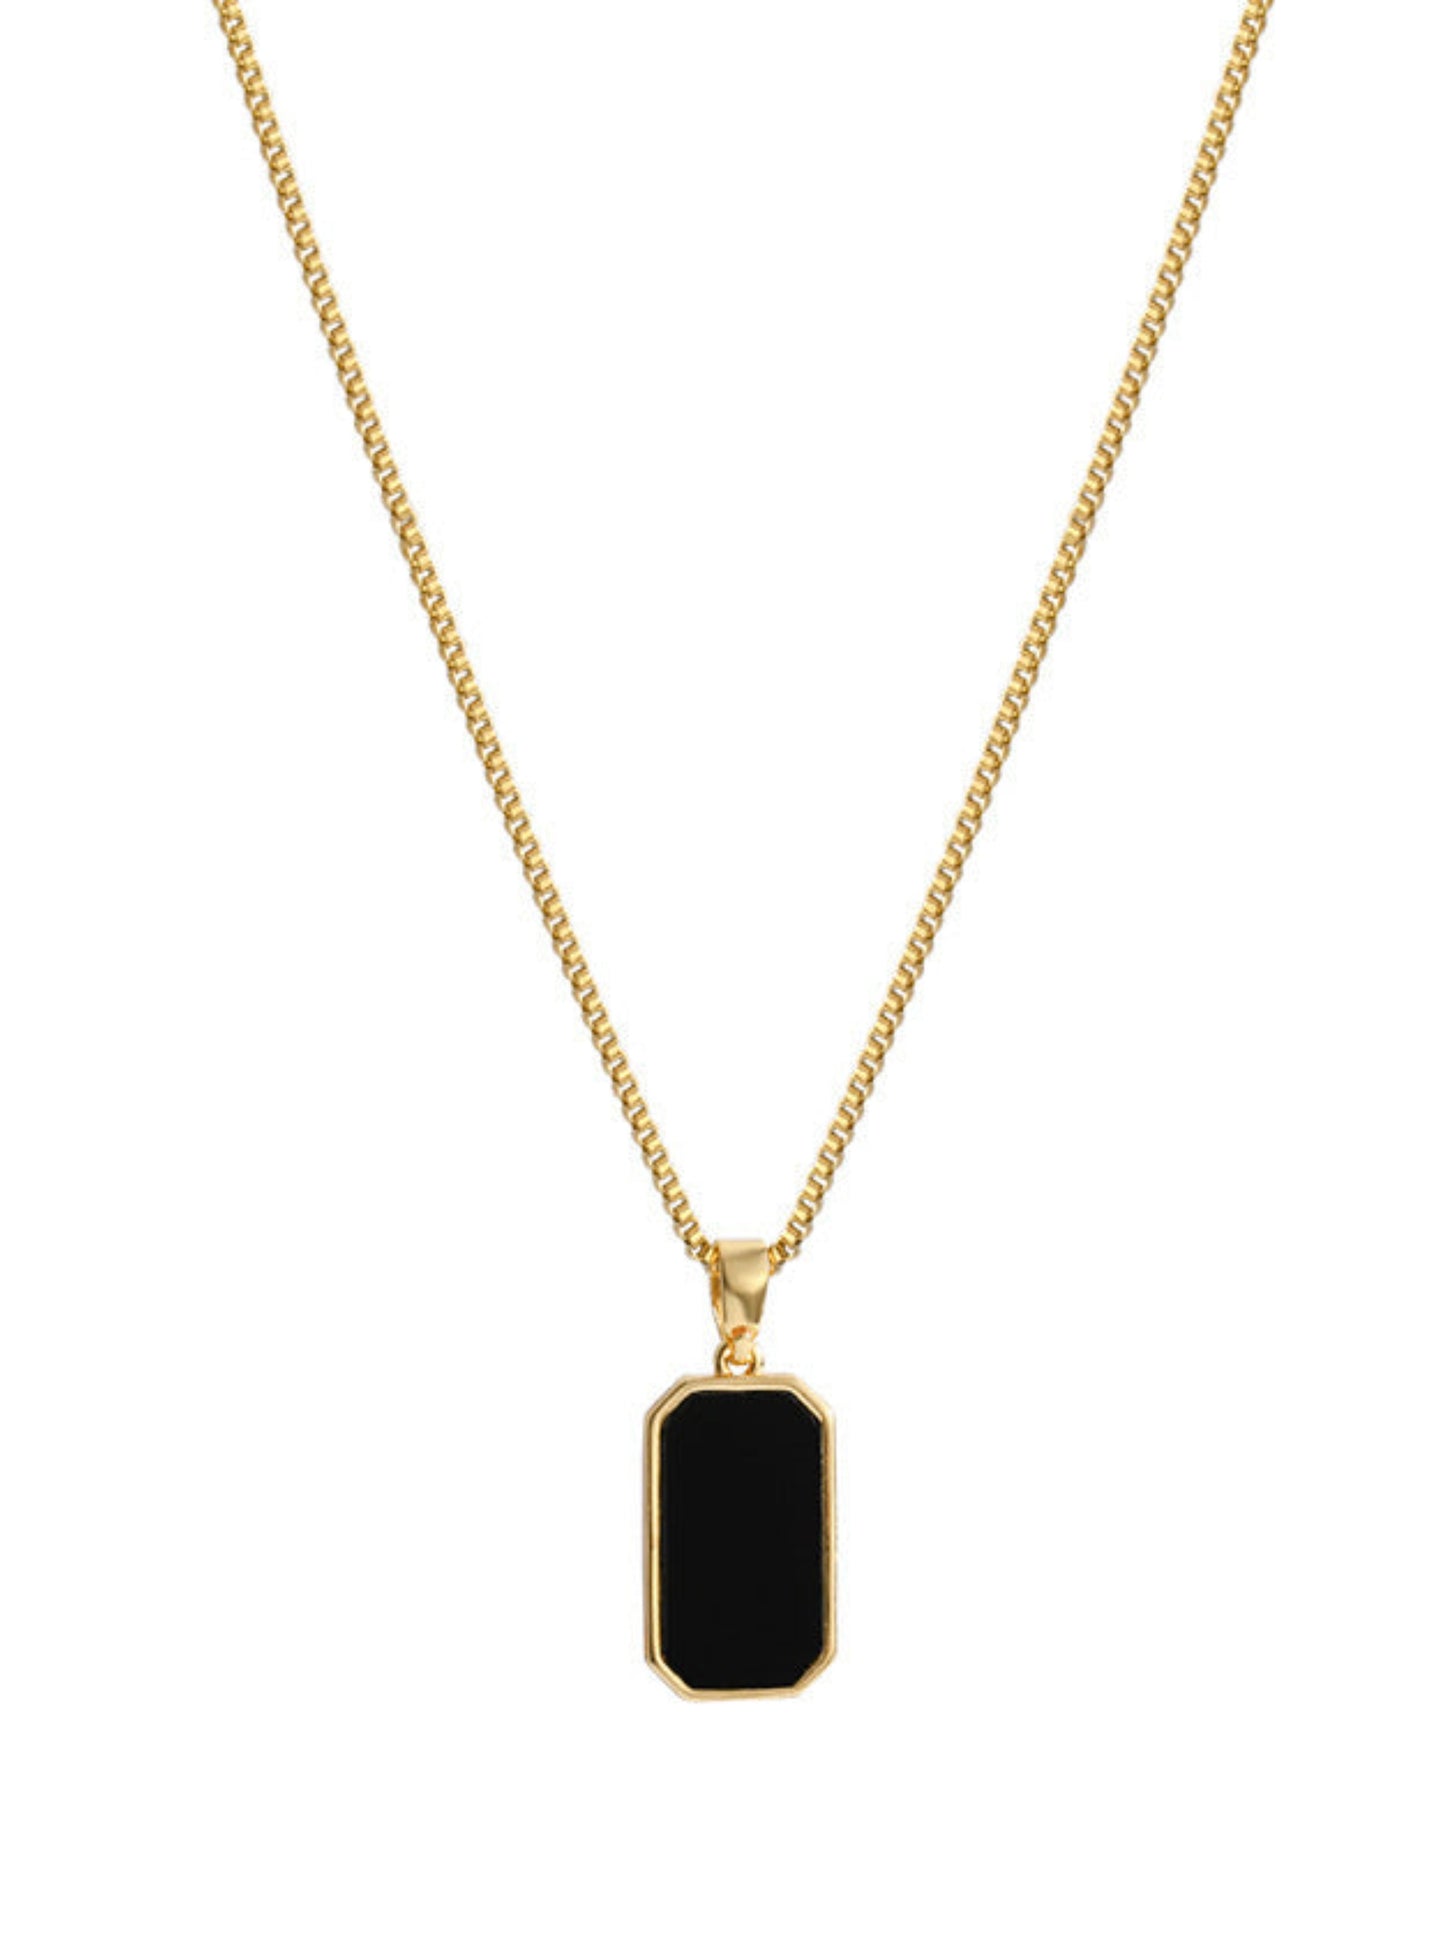 Black Dripping Necklace